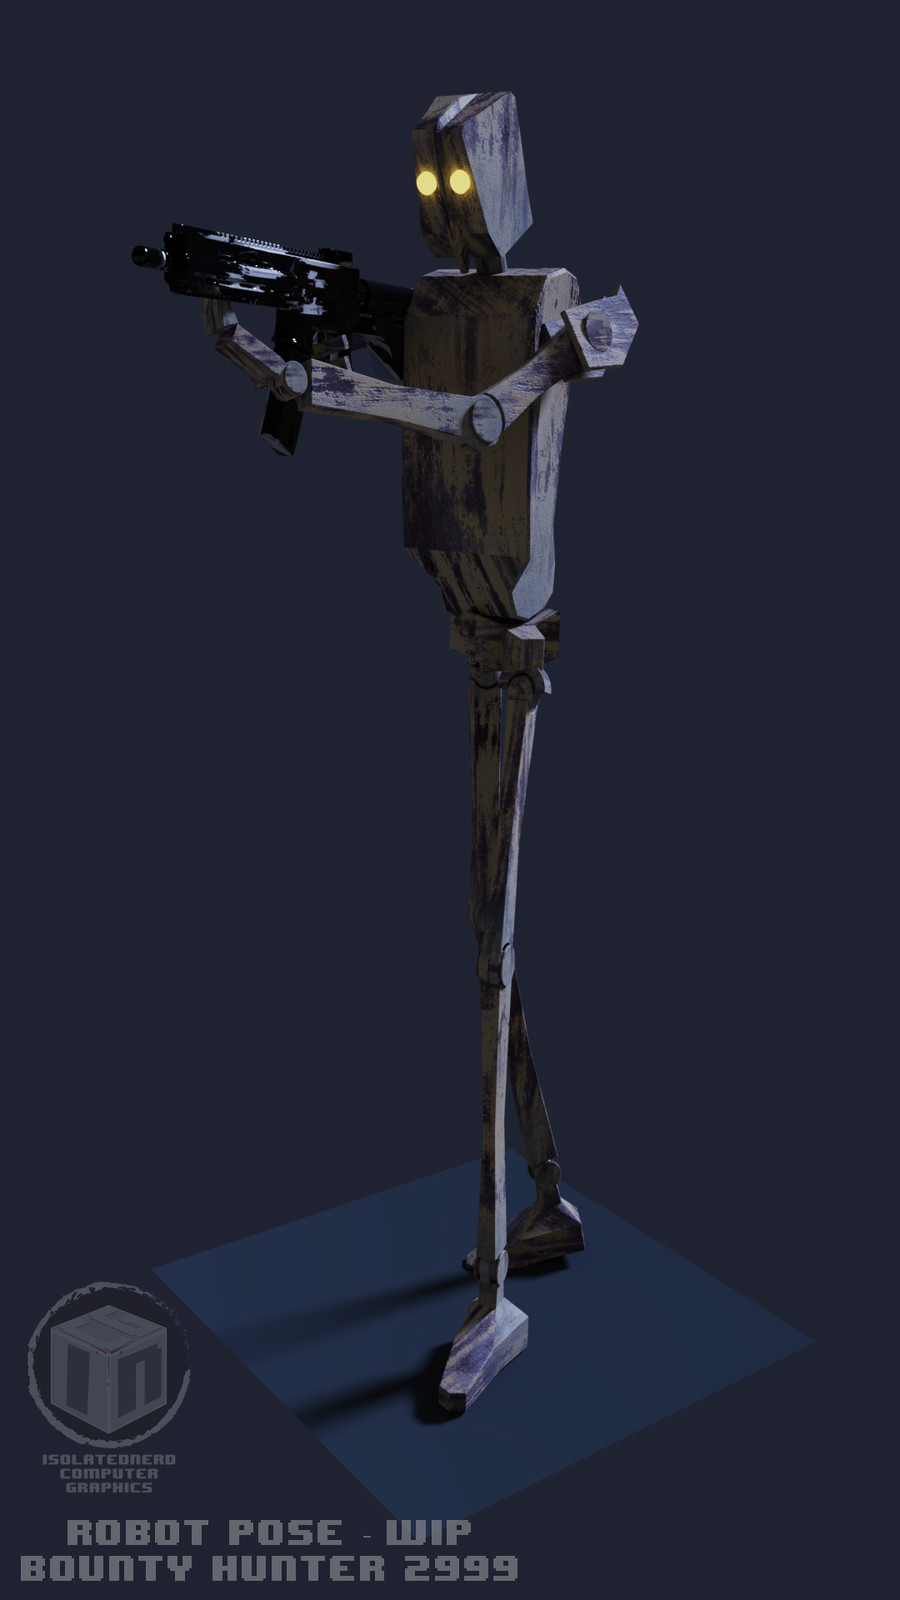 Posing robot - At this point i wont made  a greater 3d model for this robots.